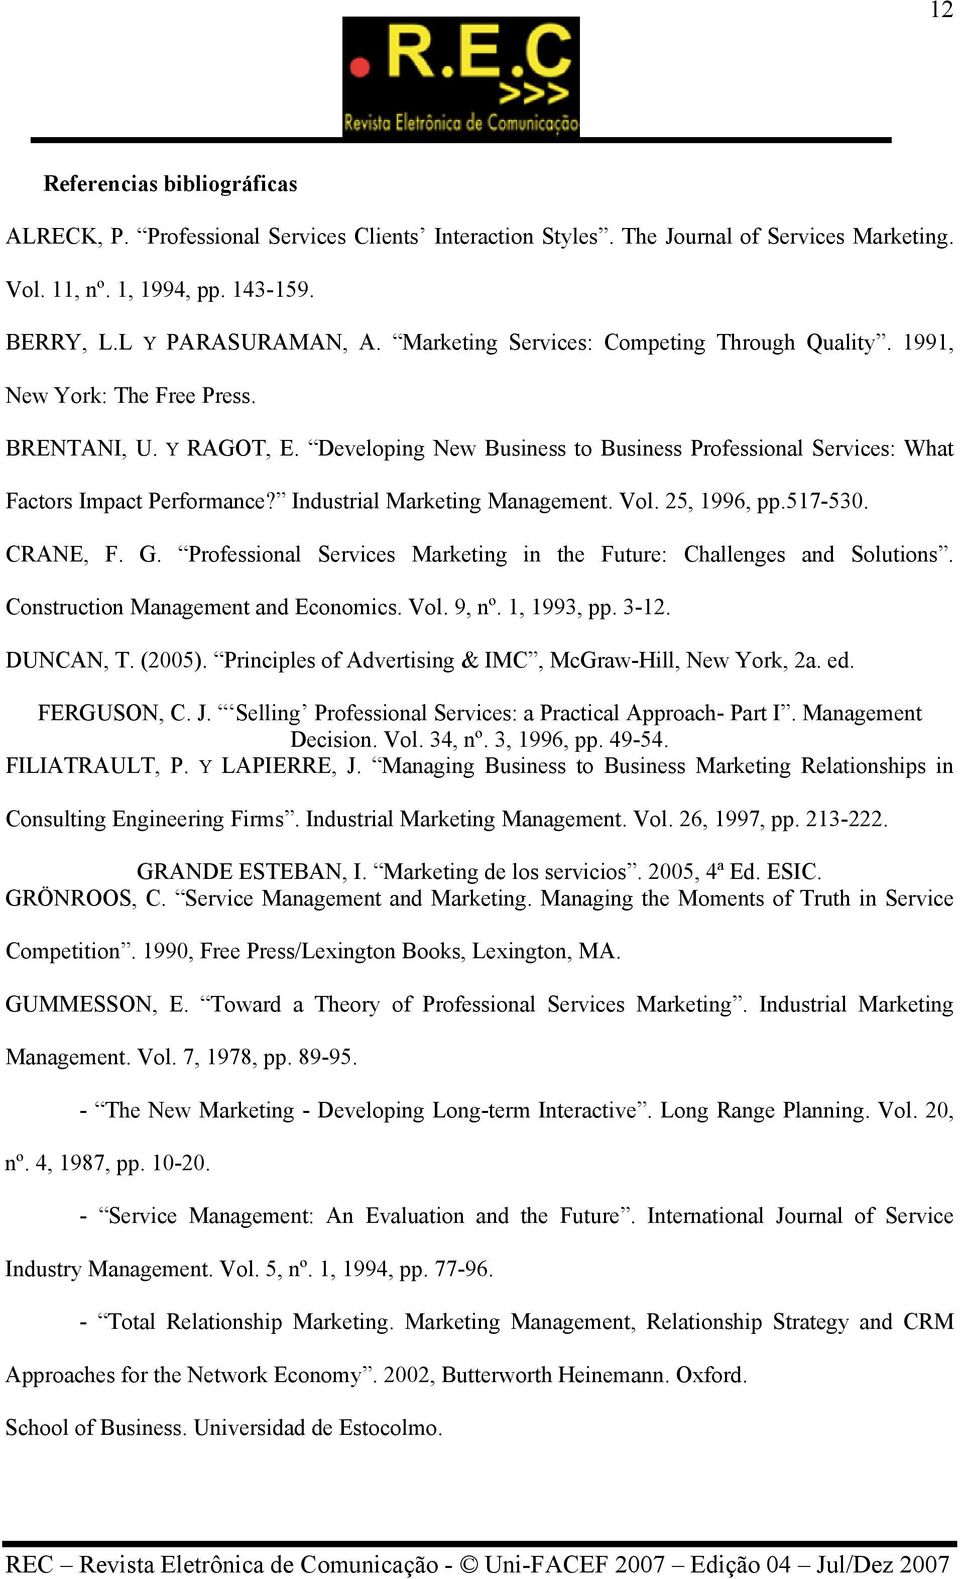 Industrial Marketing Management. Vol. 25, 1996, pp.517-530. CRANE, F. G. Professional Services Marketing in the Future: Challenges and Solutions. Construction Management and Economics. Vol. 9, nº.